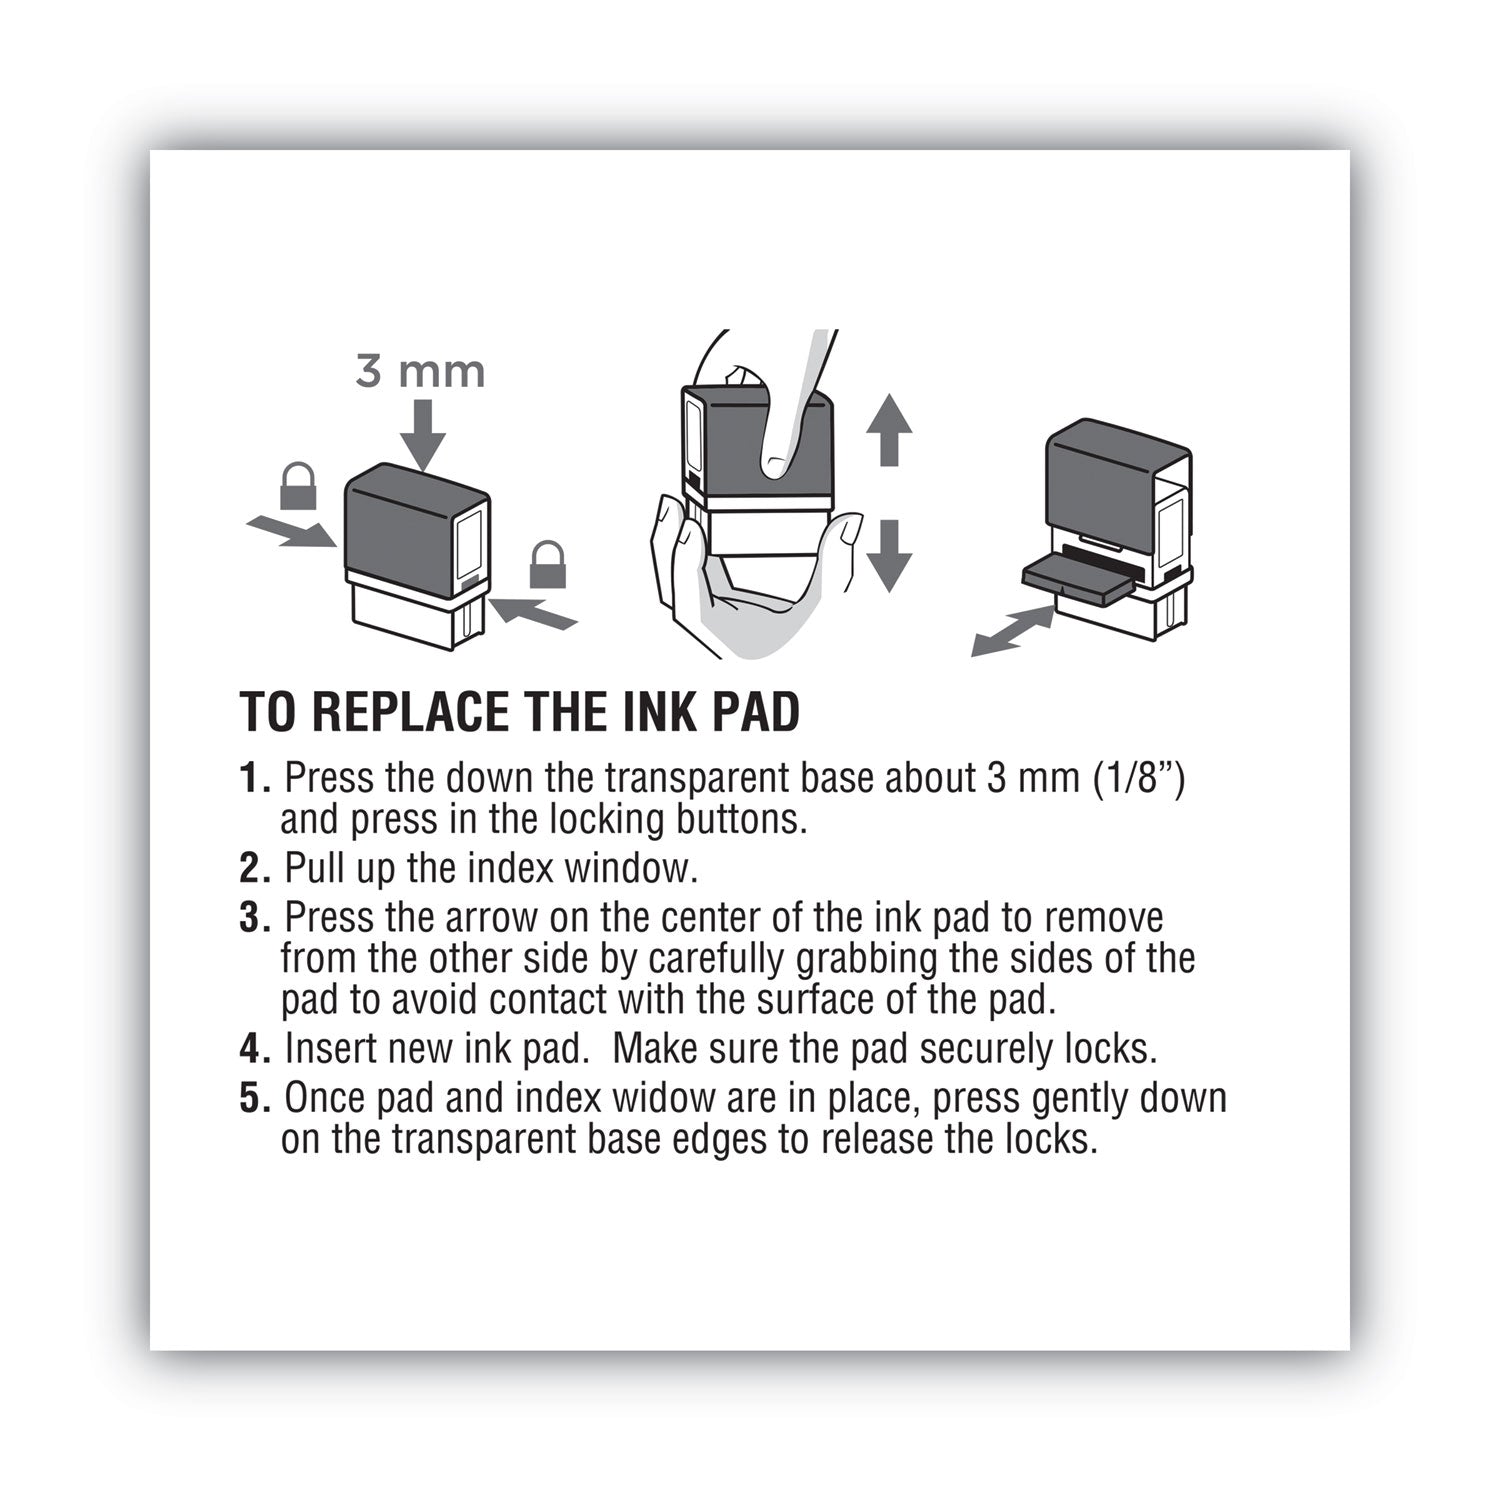 Replacement Ink Pad for 2000PLUS 1SI60P, 3.13" x 0.25", Black - 